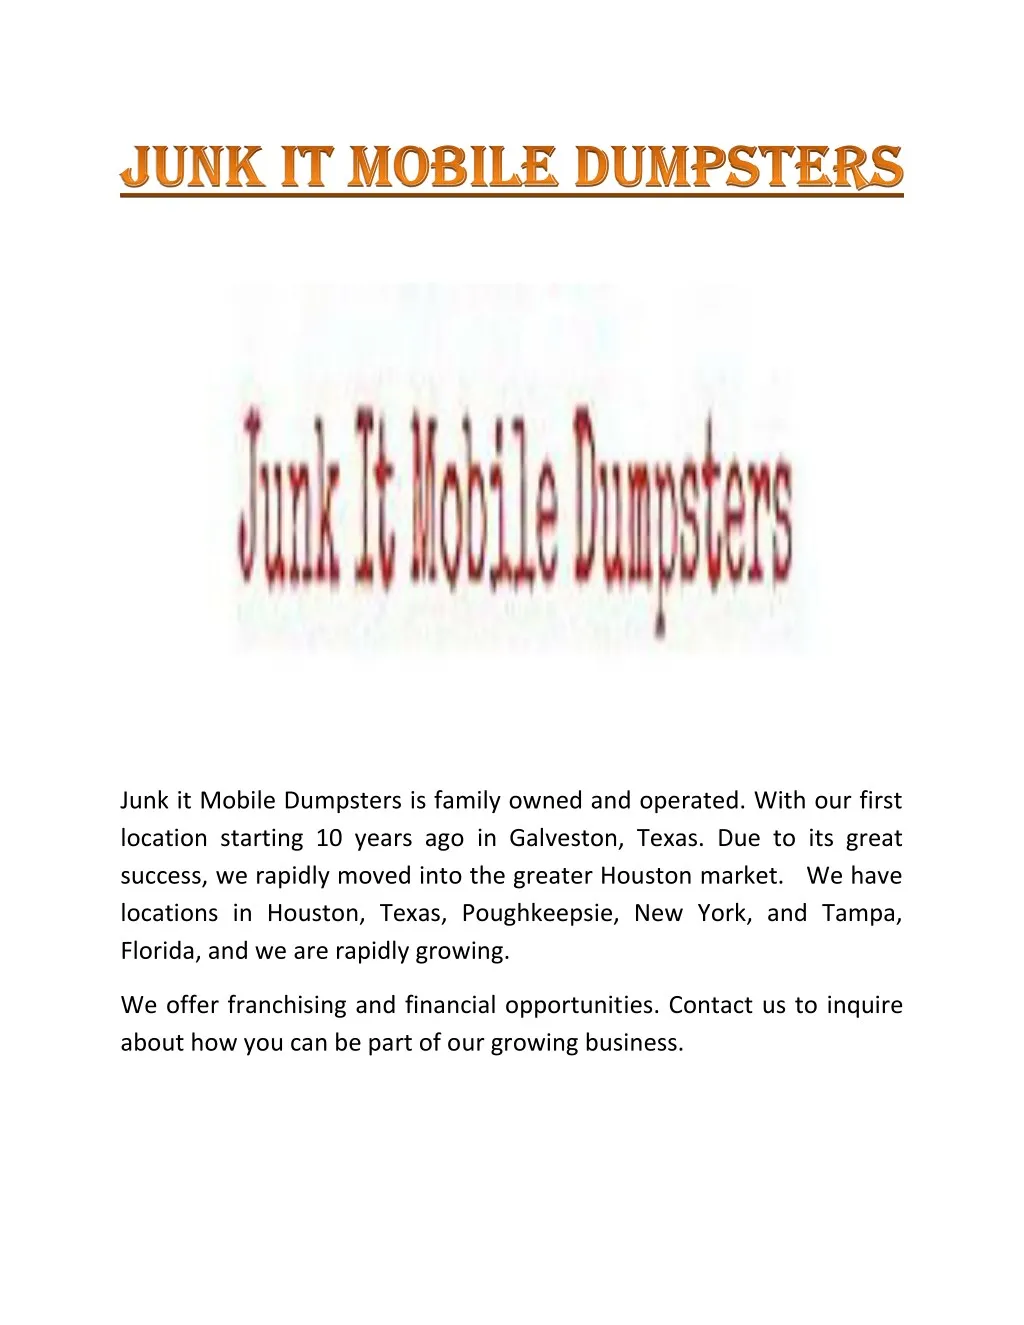 junk it mobile dumpsters is family owned